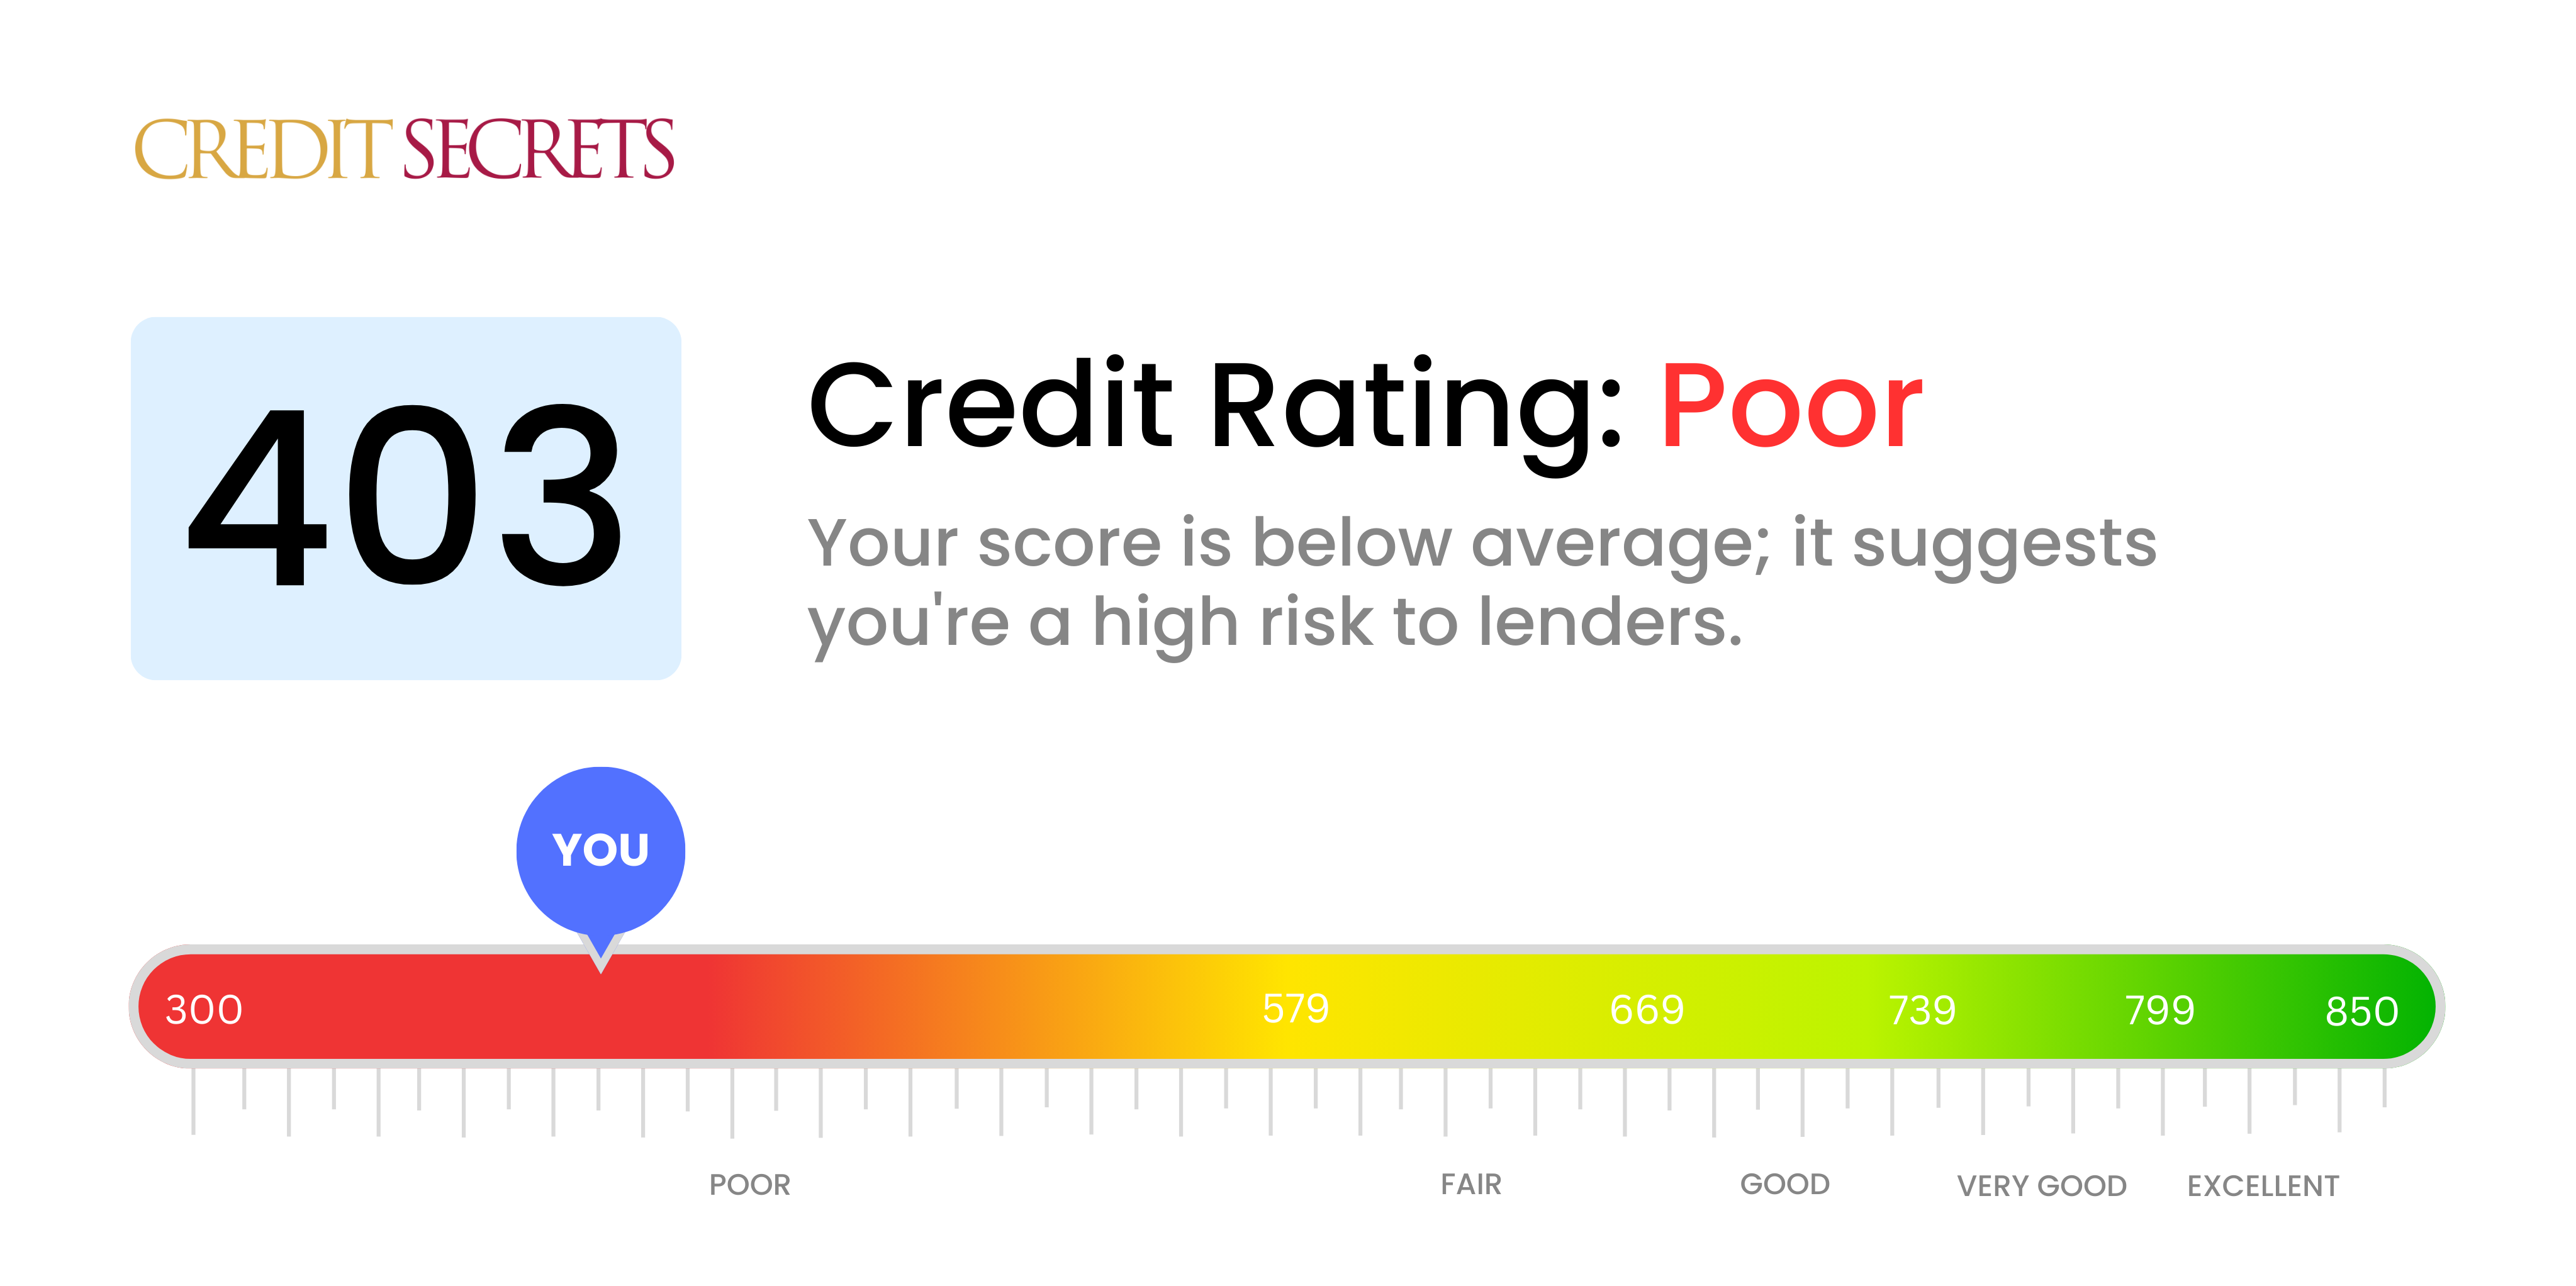 Is 403 a good credit score?